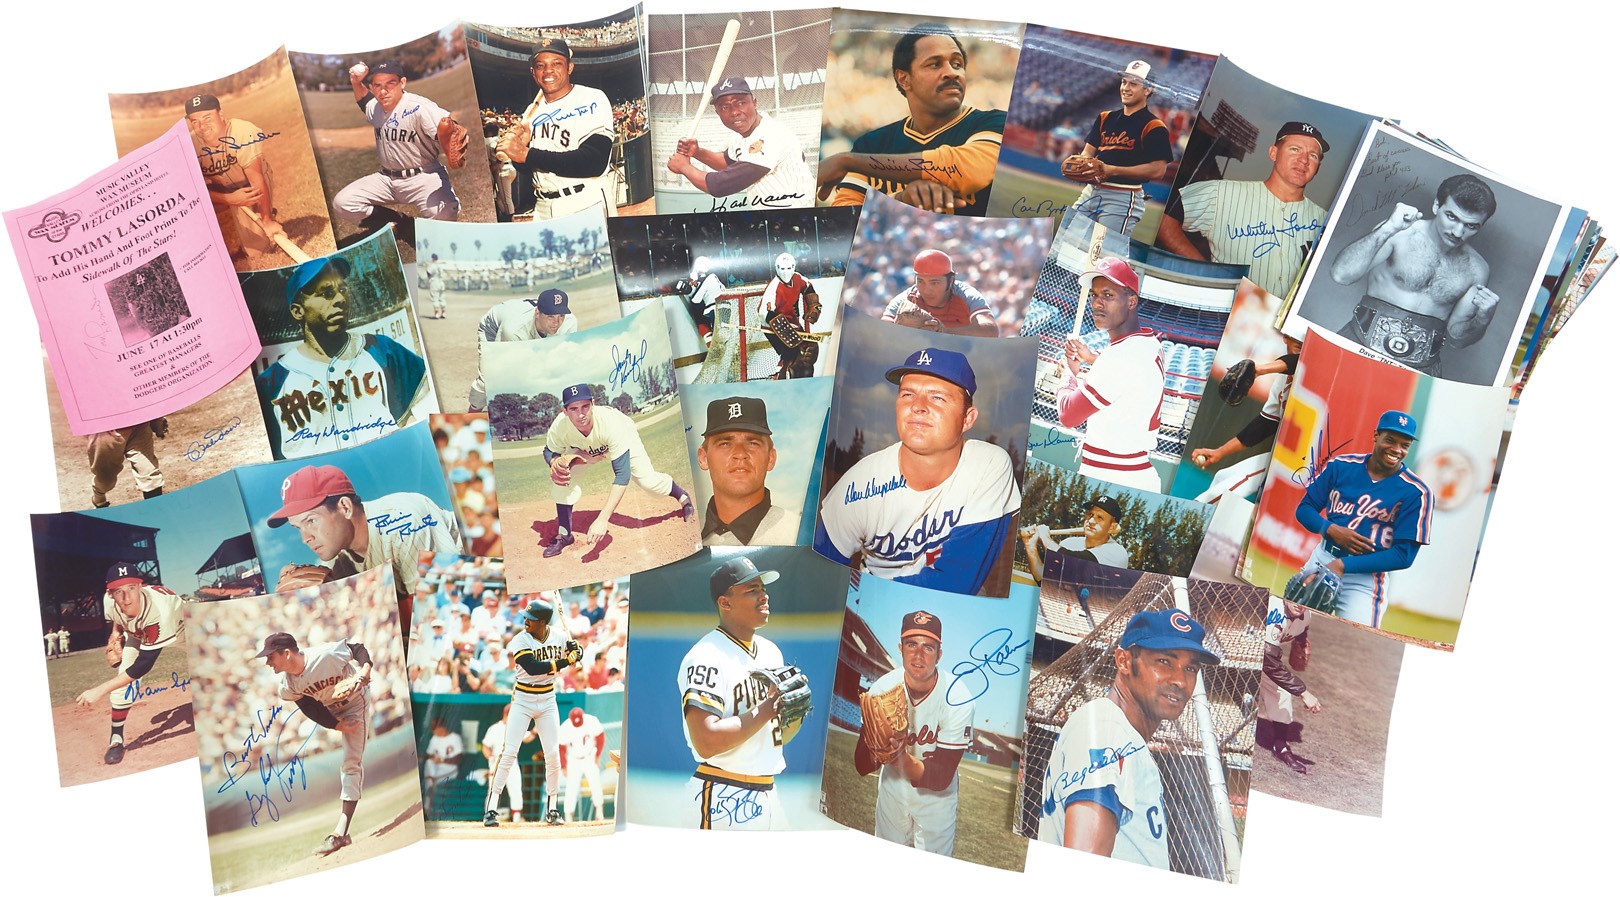 Baseball Autographs - Baseball In-Person Signed Photo Collection w/Koufax and Drysdale (65)